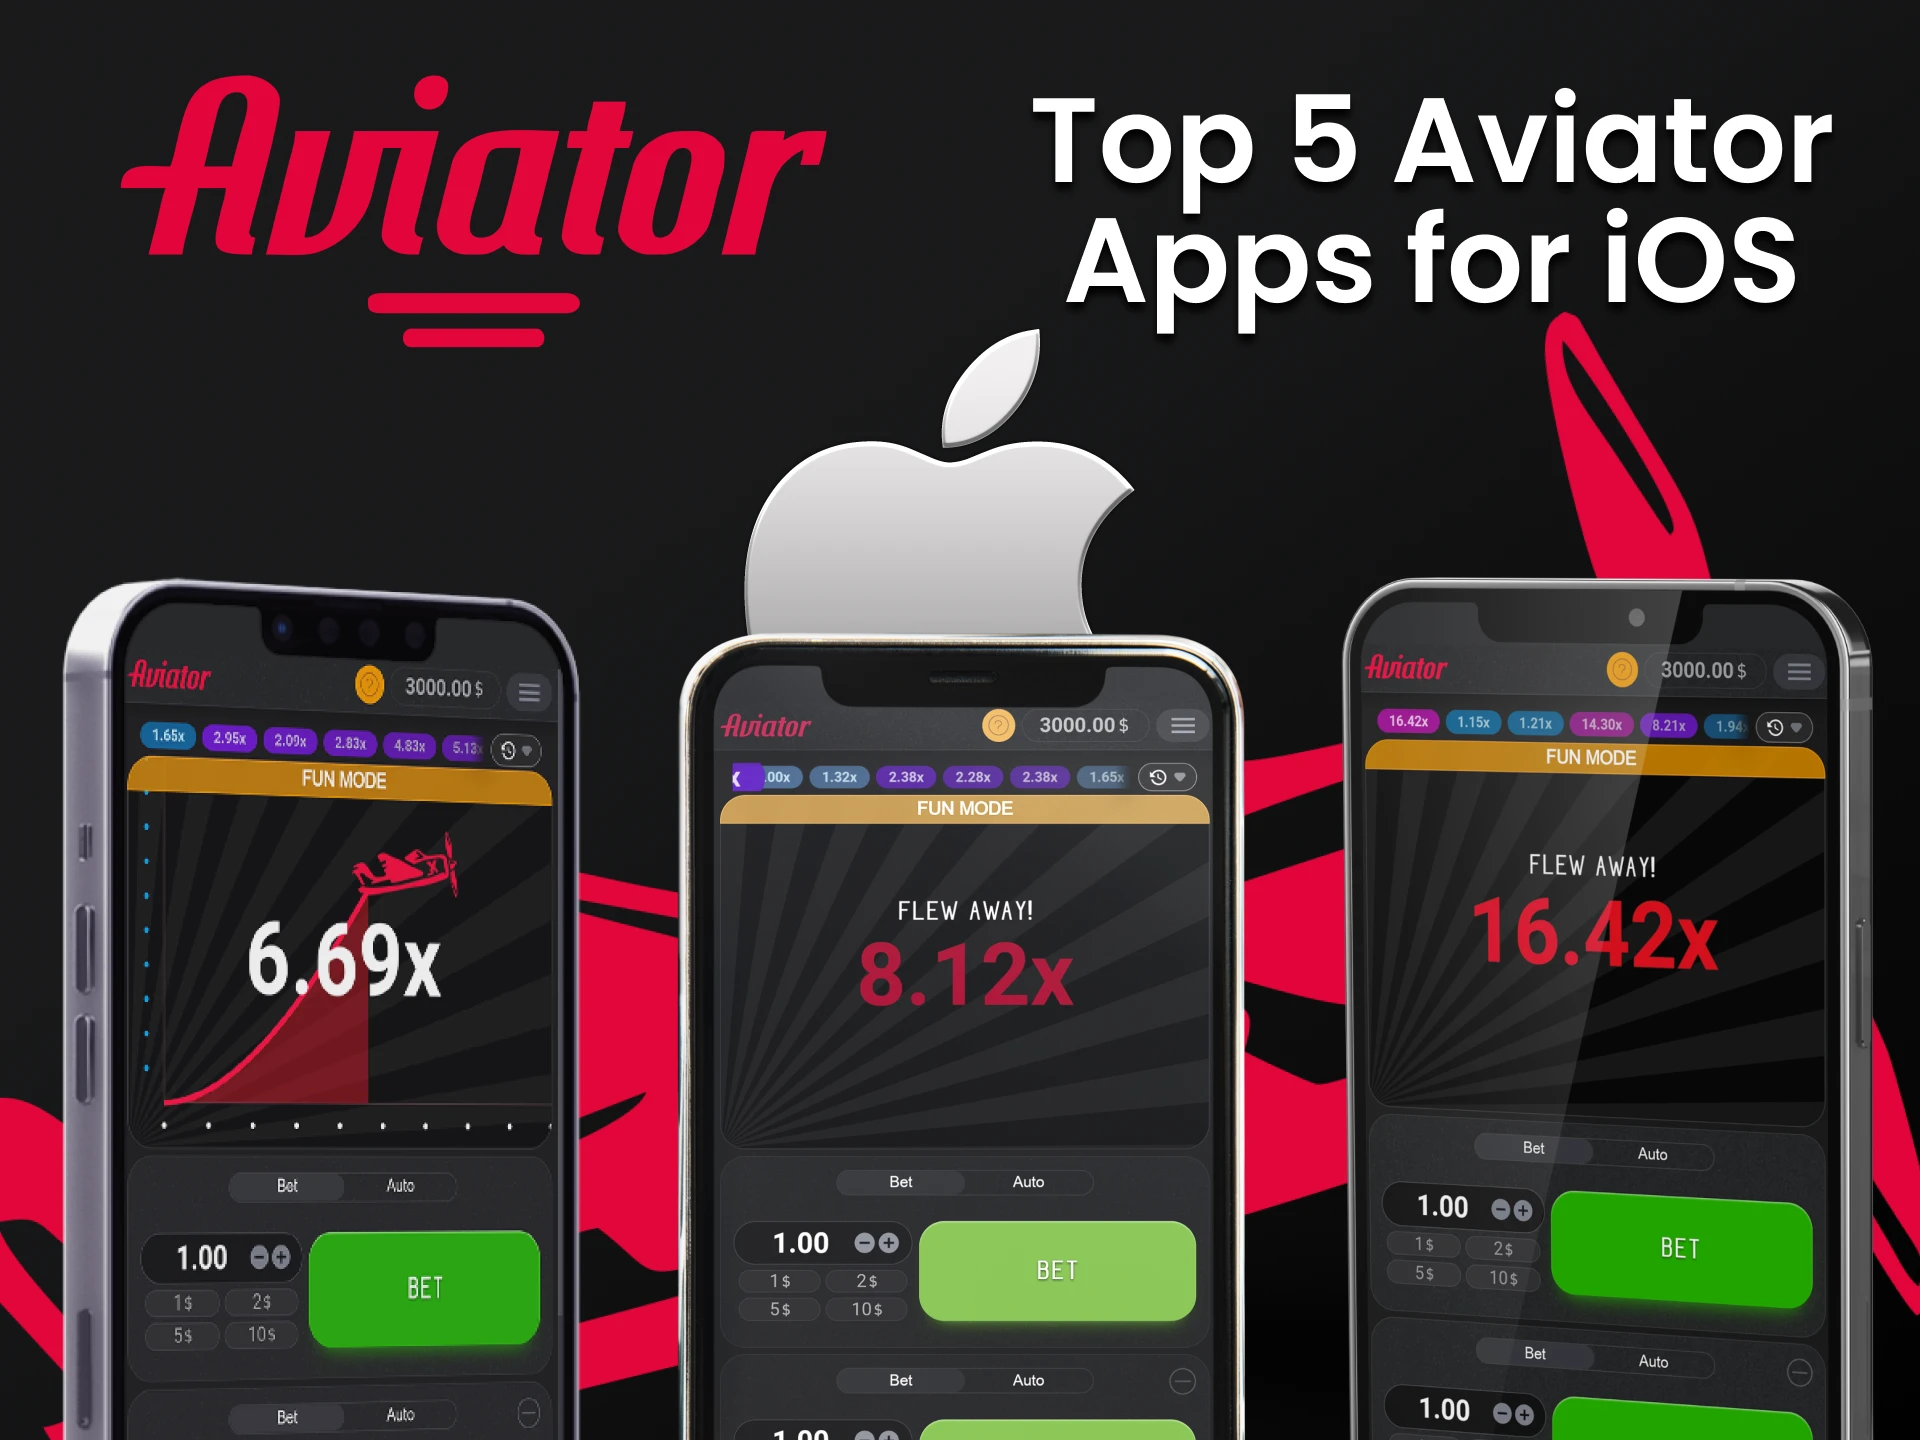 Choose the top 5 apps for iOS to play Aviator.